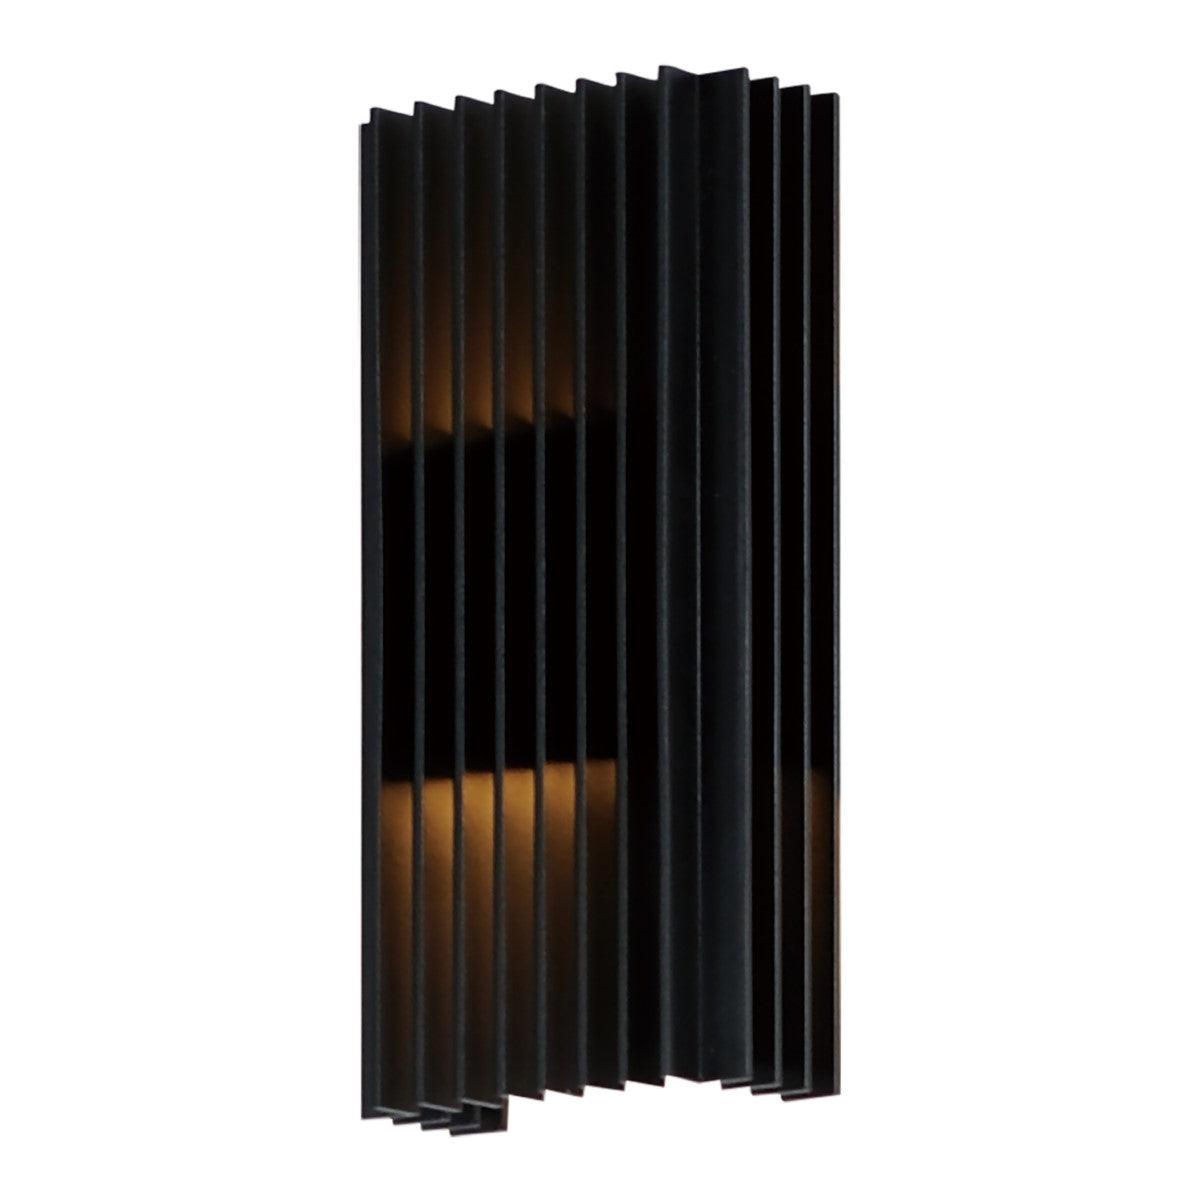 Rampart 12 in. LED Outdoor Wall Sconce 3000K Black Finish